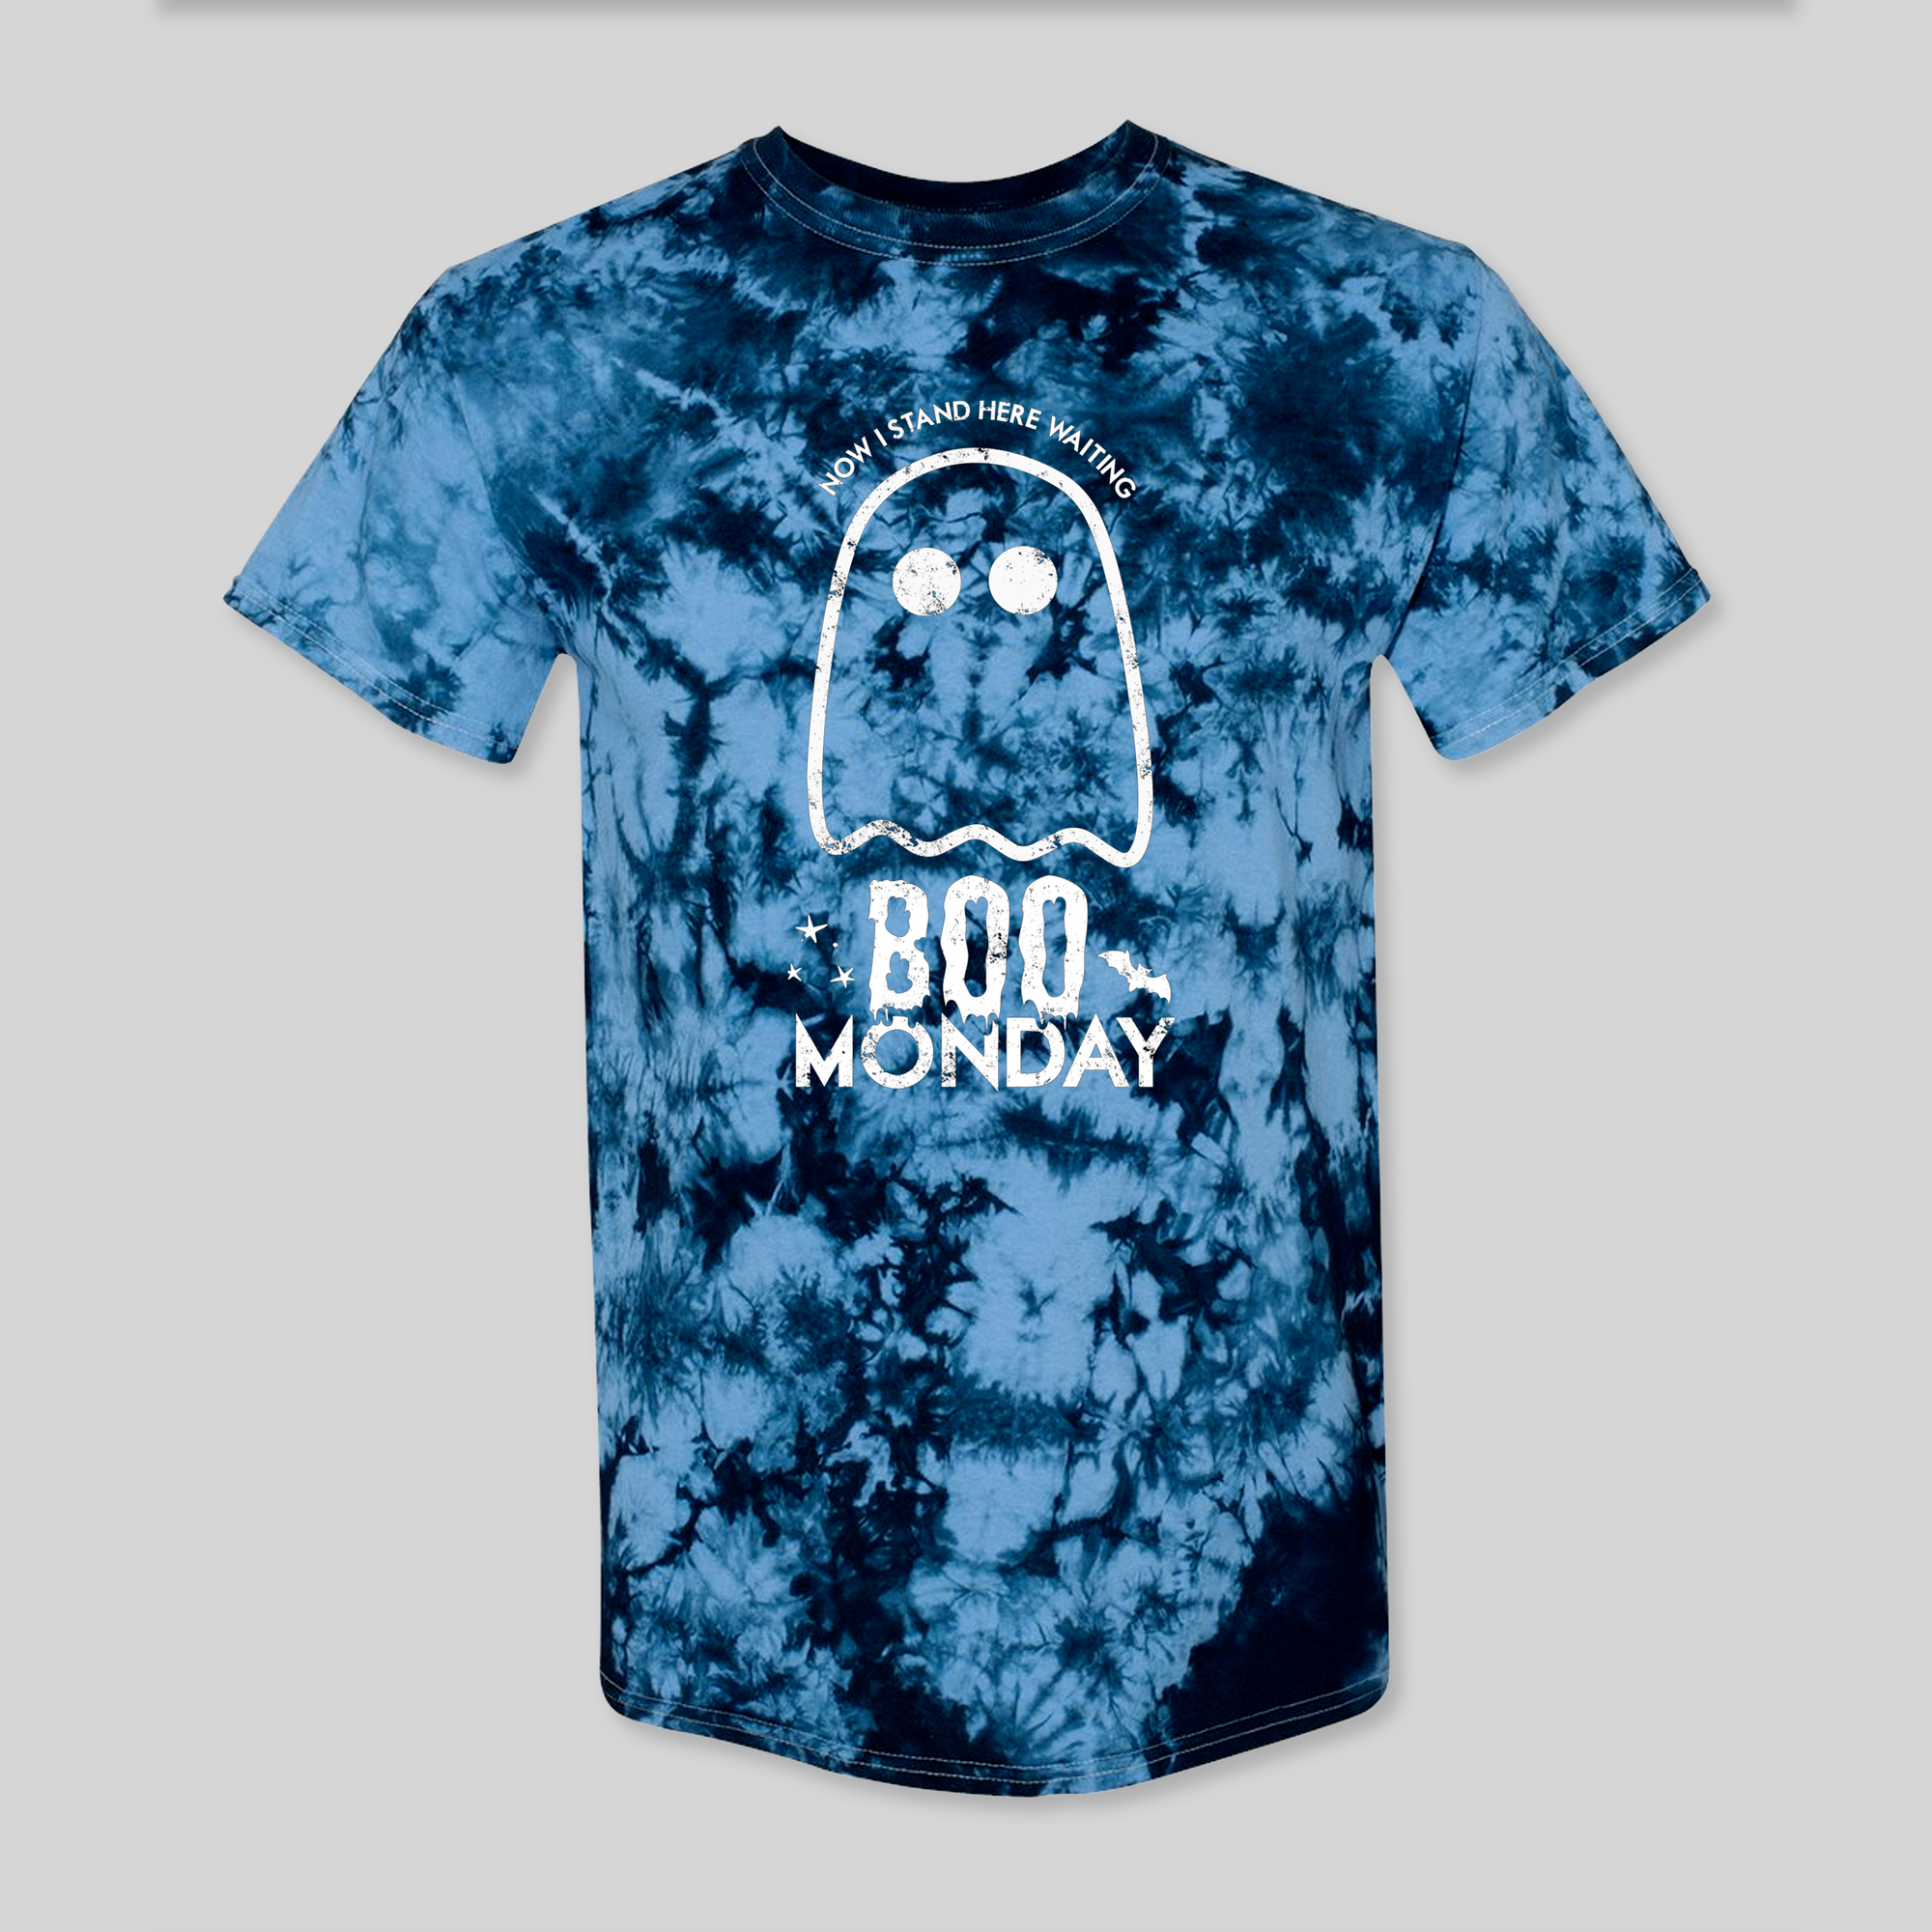 Boo Monday Tie Dye Unisex Tee for Adults